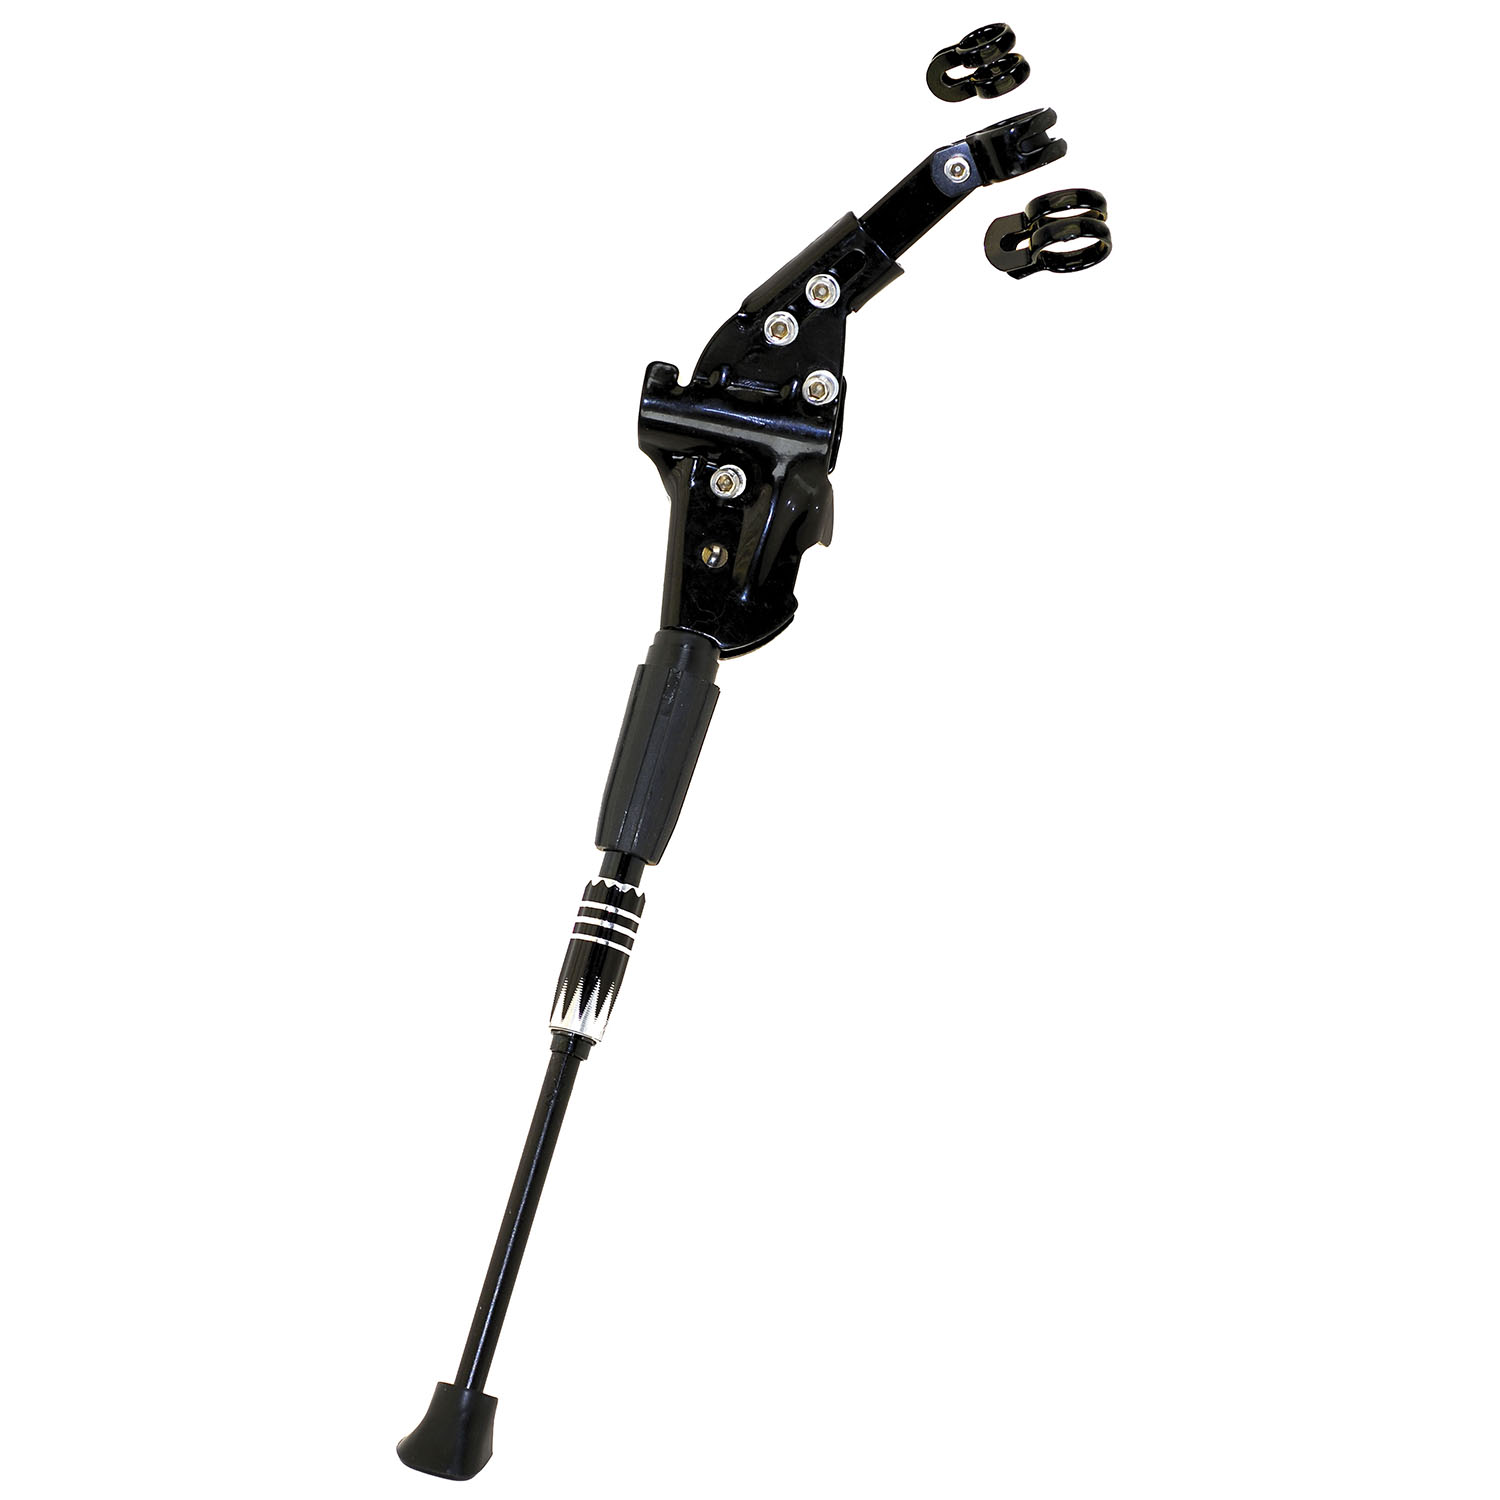 M-WAVE Strong R III bike stand – AVAILABLE IN SELECTED BIKE SHOPS